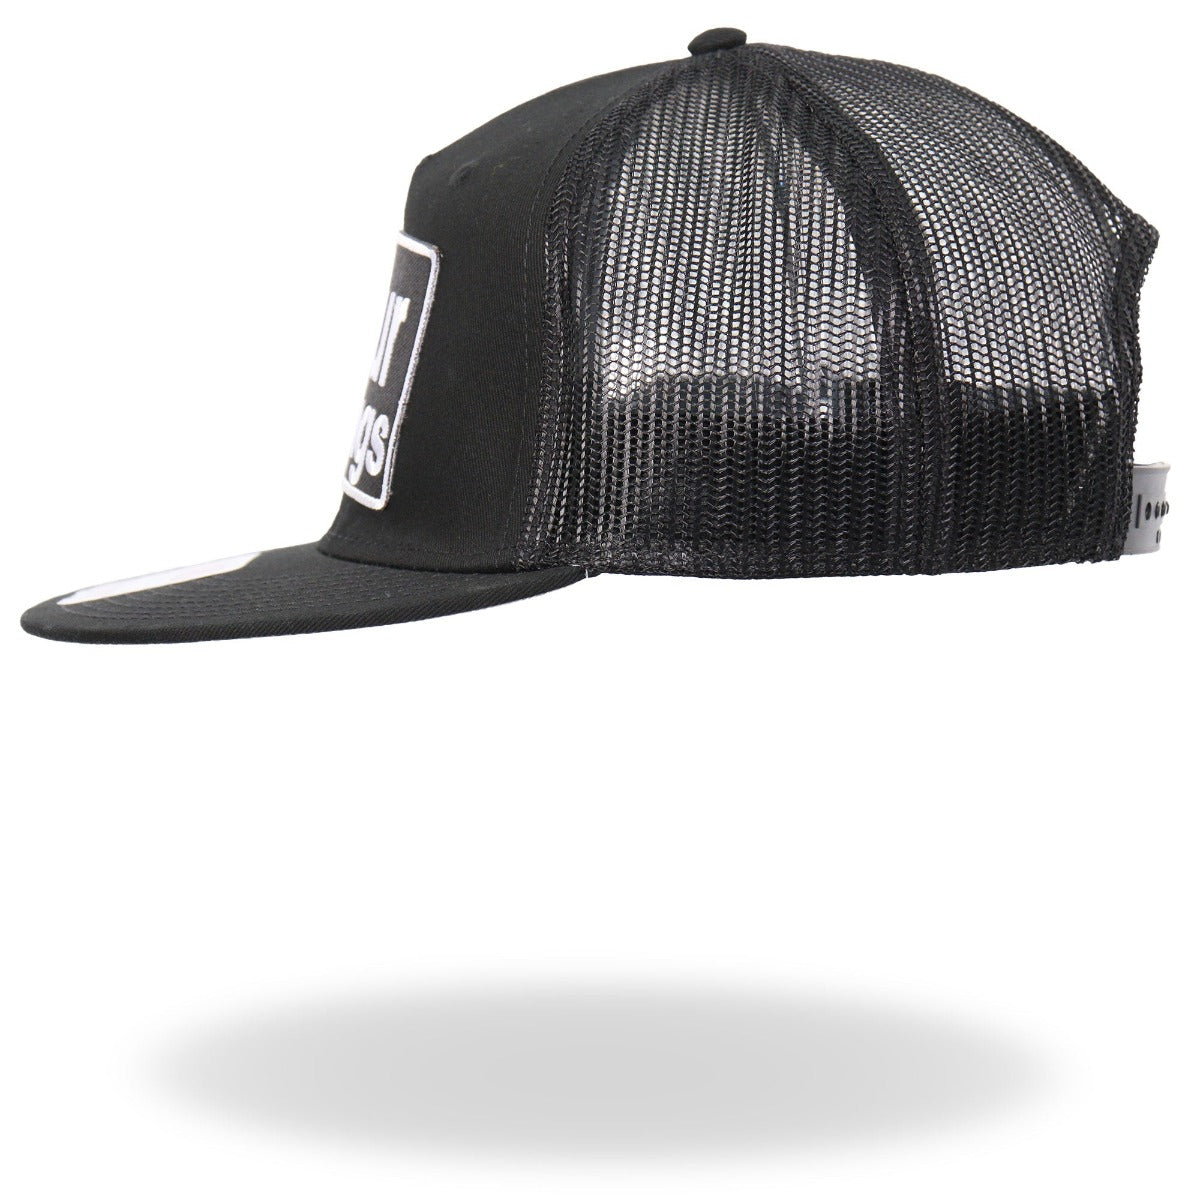 A Hot Leathers F Your Feelings Snapback Hat with a white logo patch.